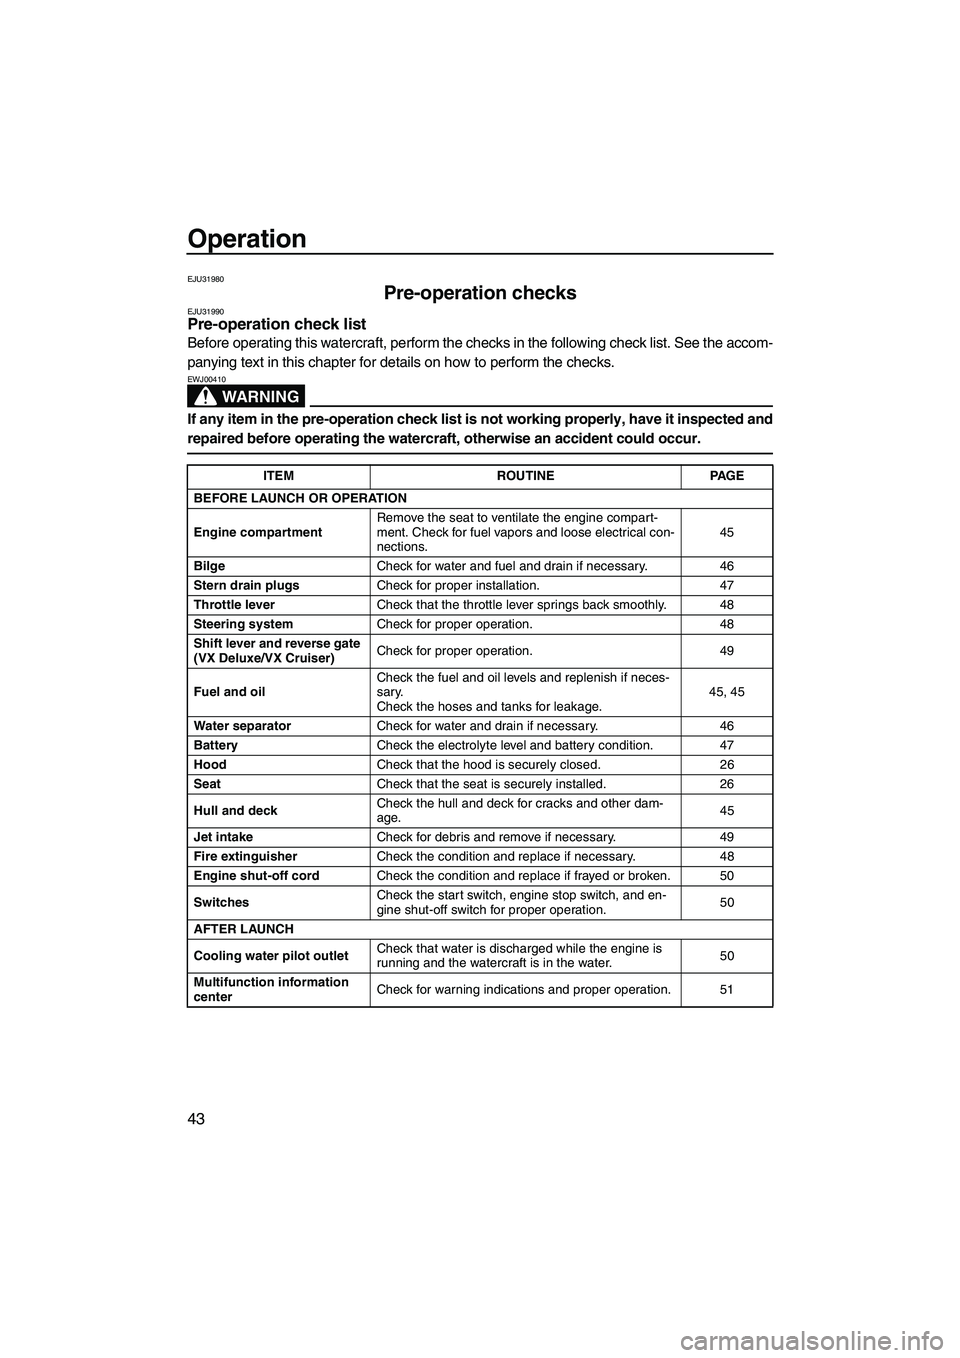 YAMAHA VX SPORT 2007 Service Manual Operation
43
EJU31980
Pre-operation checks EJU31990Pre-operation check list 
Before operating this watercraft, perform the checks in the following check list. See the accom-
panying text in this chapt